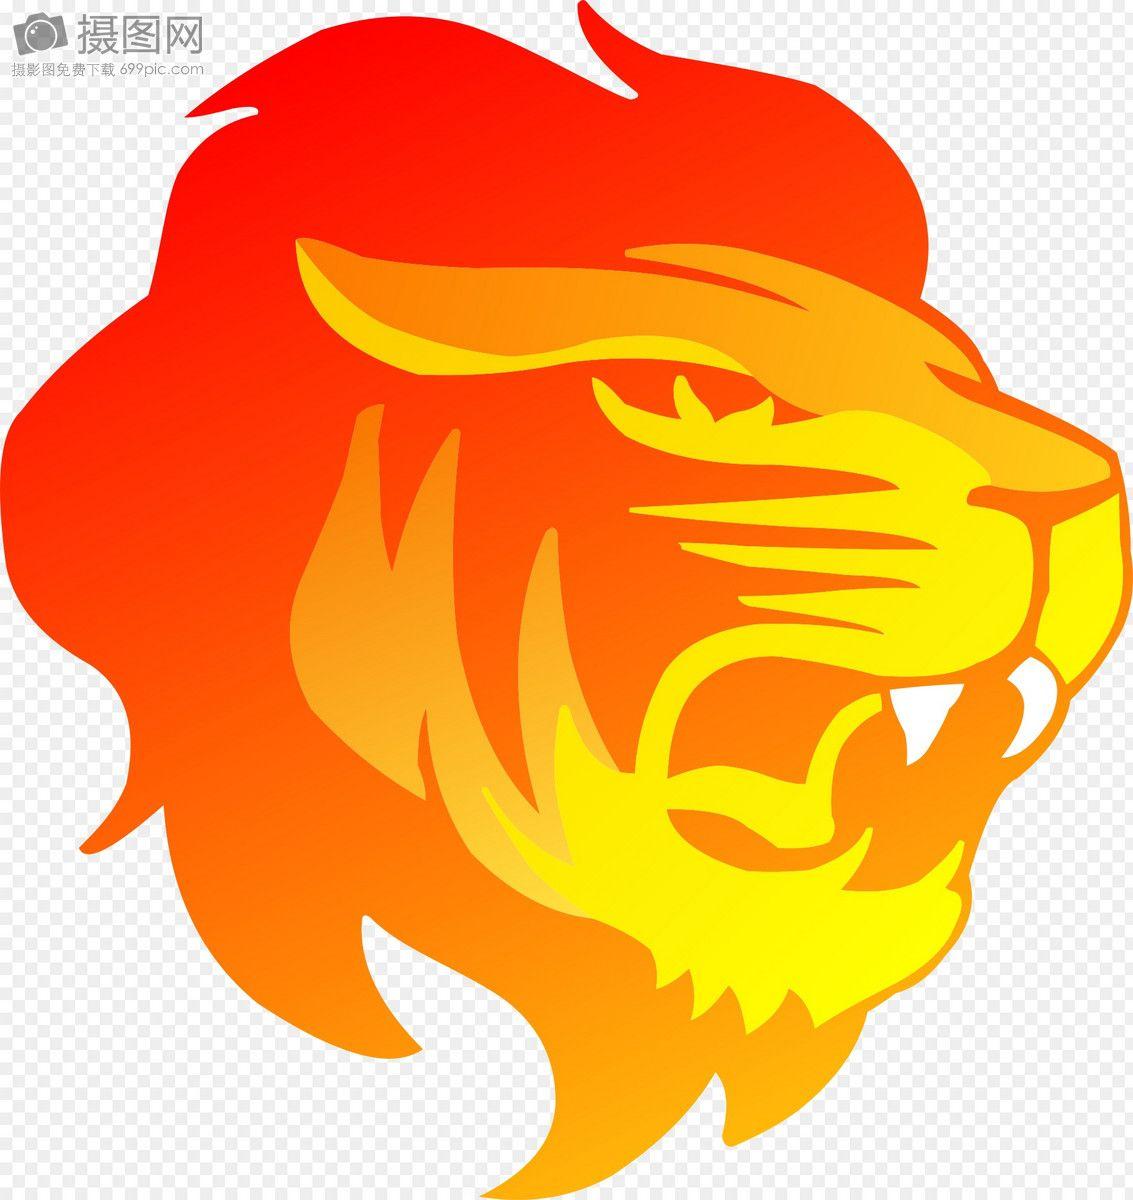 Red Lion Head Logo - A red lions head graphics image_picture free download